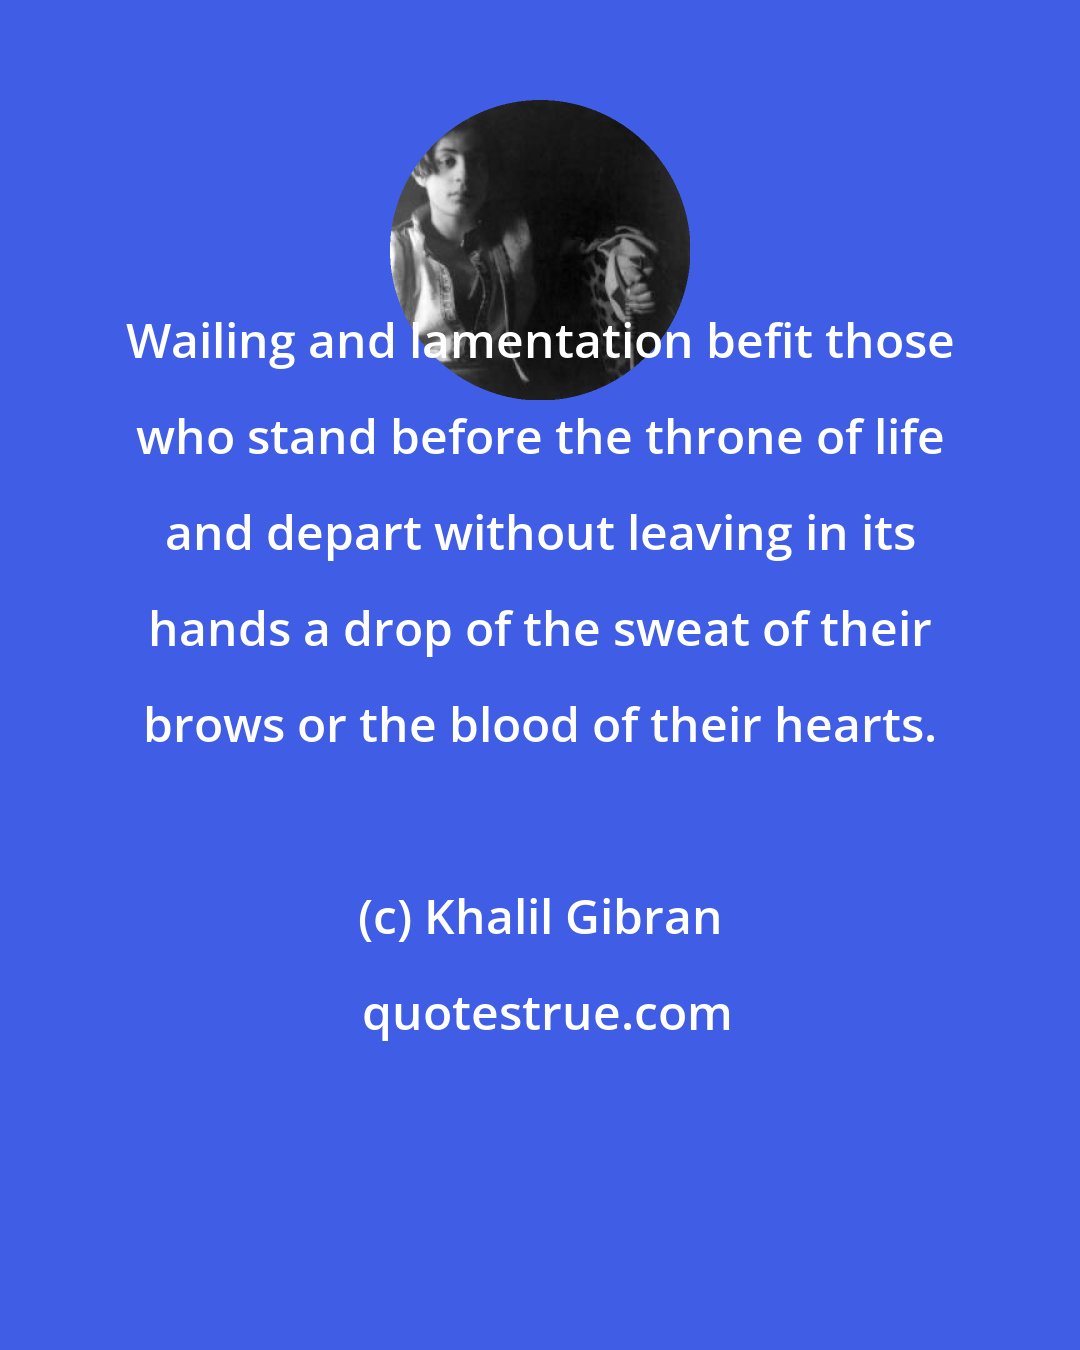 Khalil Gibran: Wailing and lamentation befit those who stand before the throne of life and depart without leaving in its hands a drop of the sweat of their brows or the blood of their hearts.